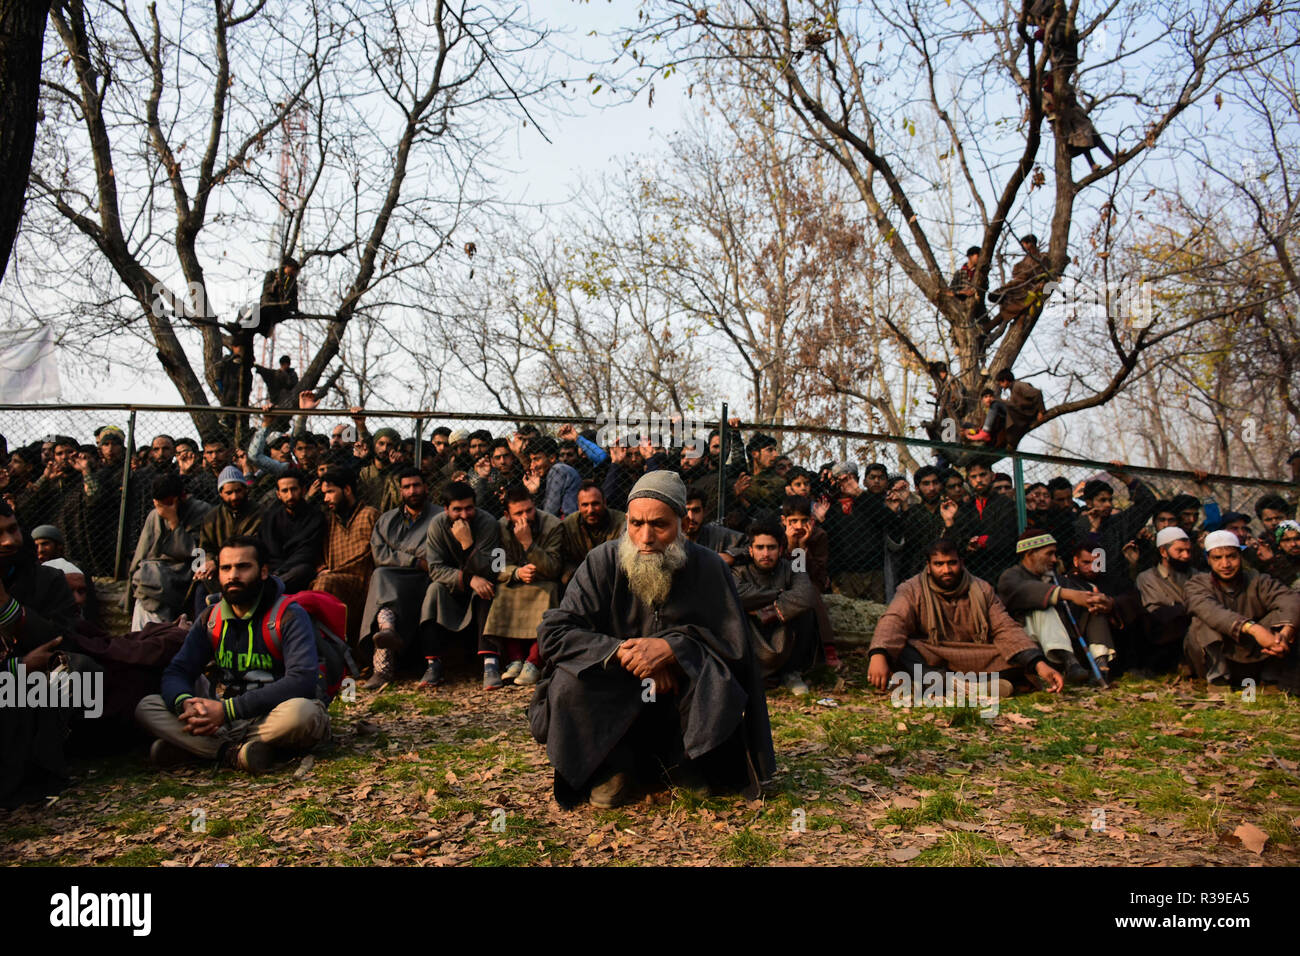 November 20, 2018 - Kashmiri Muslims attend the funeral of rebel Abid Chopan who was killed during a confrontation with Indian forces in the Shopian district of Indian administered Kashmir on 20 November 2018. Chopan is one of four rebels killed in a gunfight between Indian forces and Kashmiri rebels who were identified as Inam ul Haq of Feripora, Abid Nazir Chopan of Paddarpora, Mehraj ud Din Najar of Drawni Zainapora and Basharat Ahmad of Chotigam. Two Indian paratroopers were also killed in the exchange of fire. A lady was also injured by a live ammunition near the gunfight site in the Shop Stock Photo